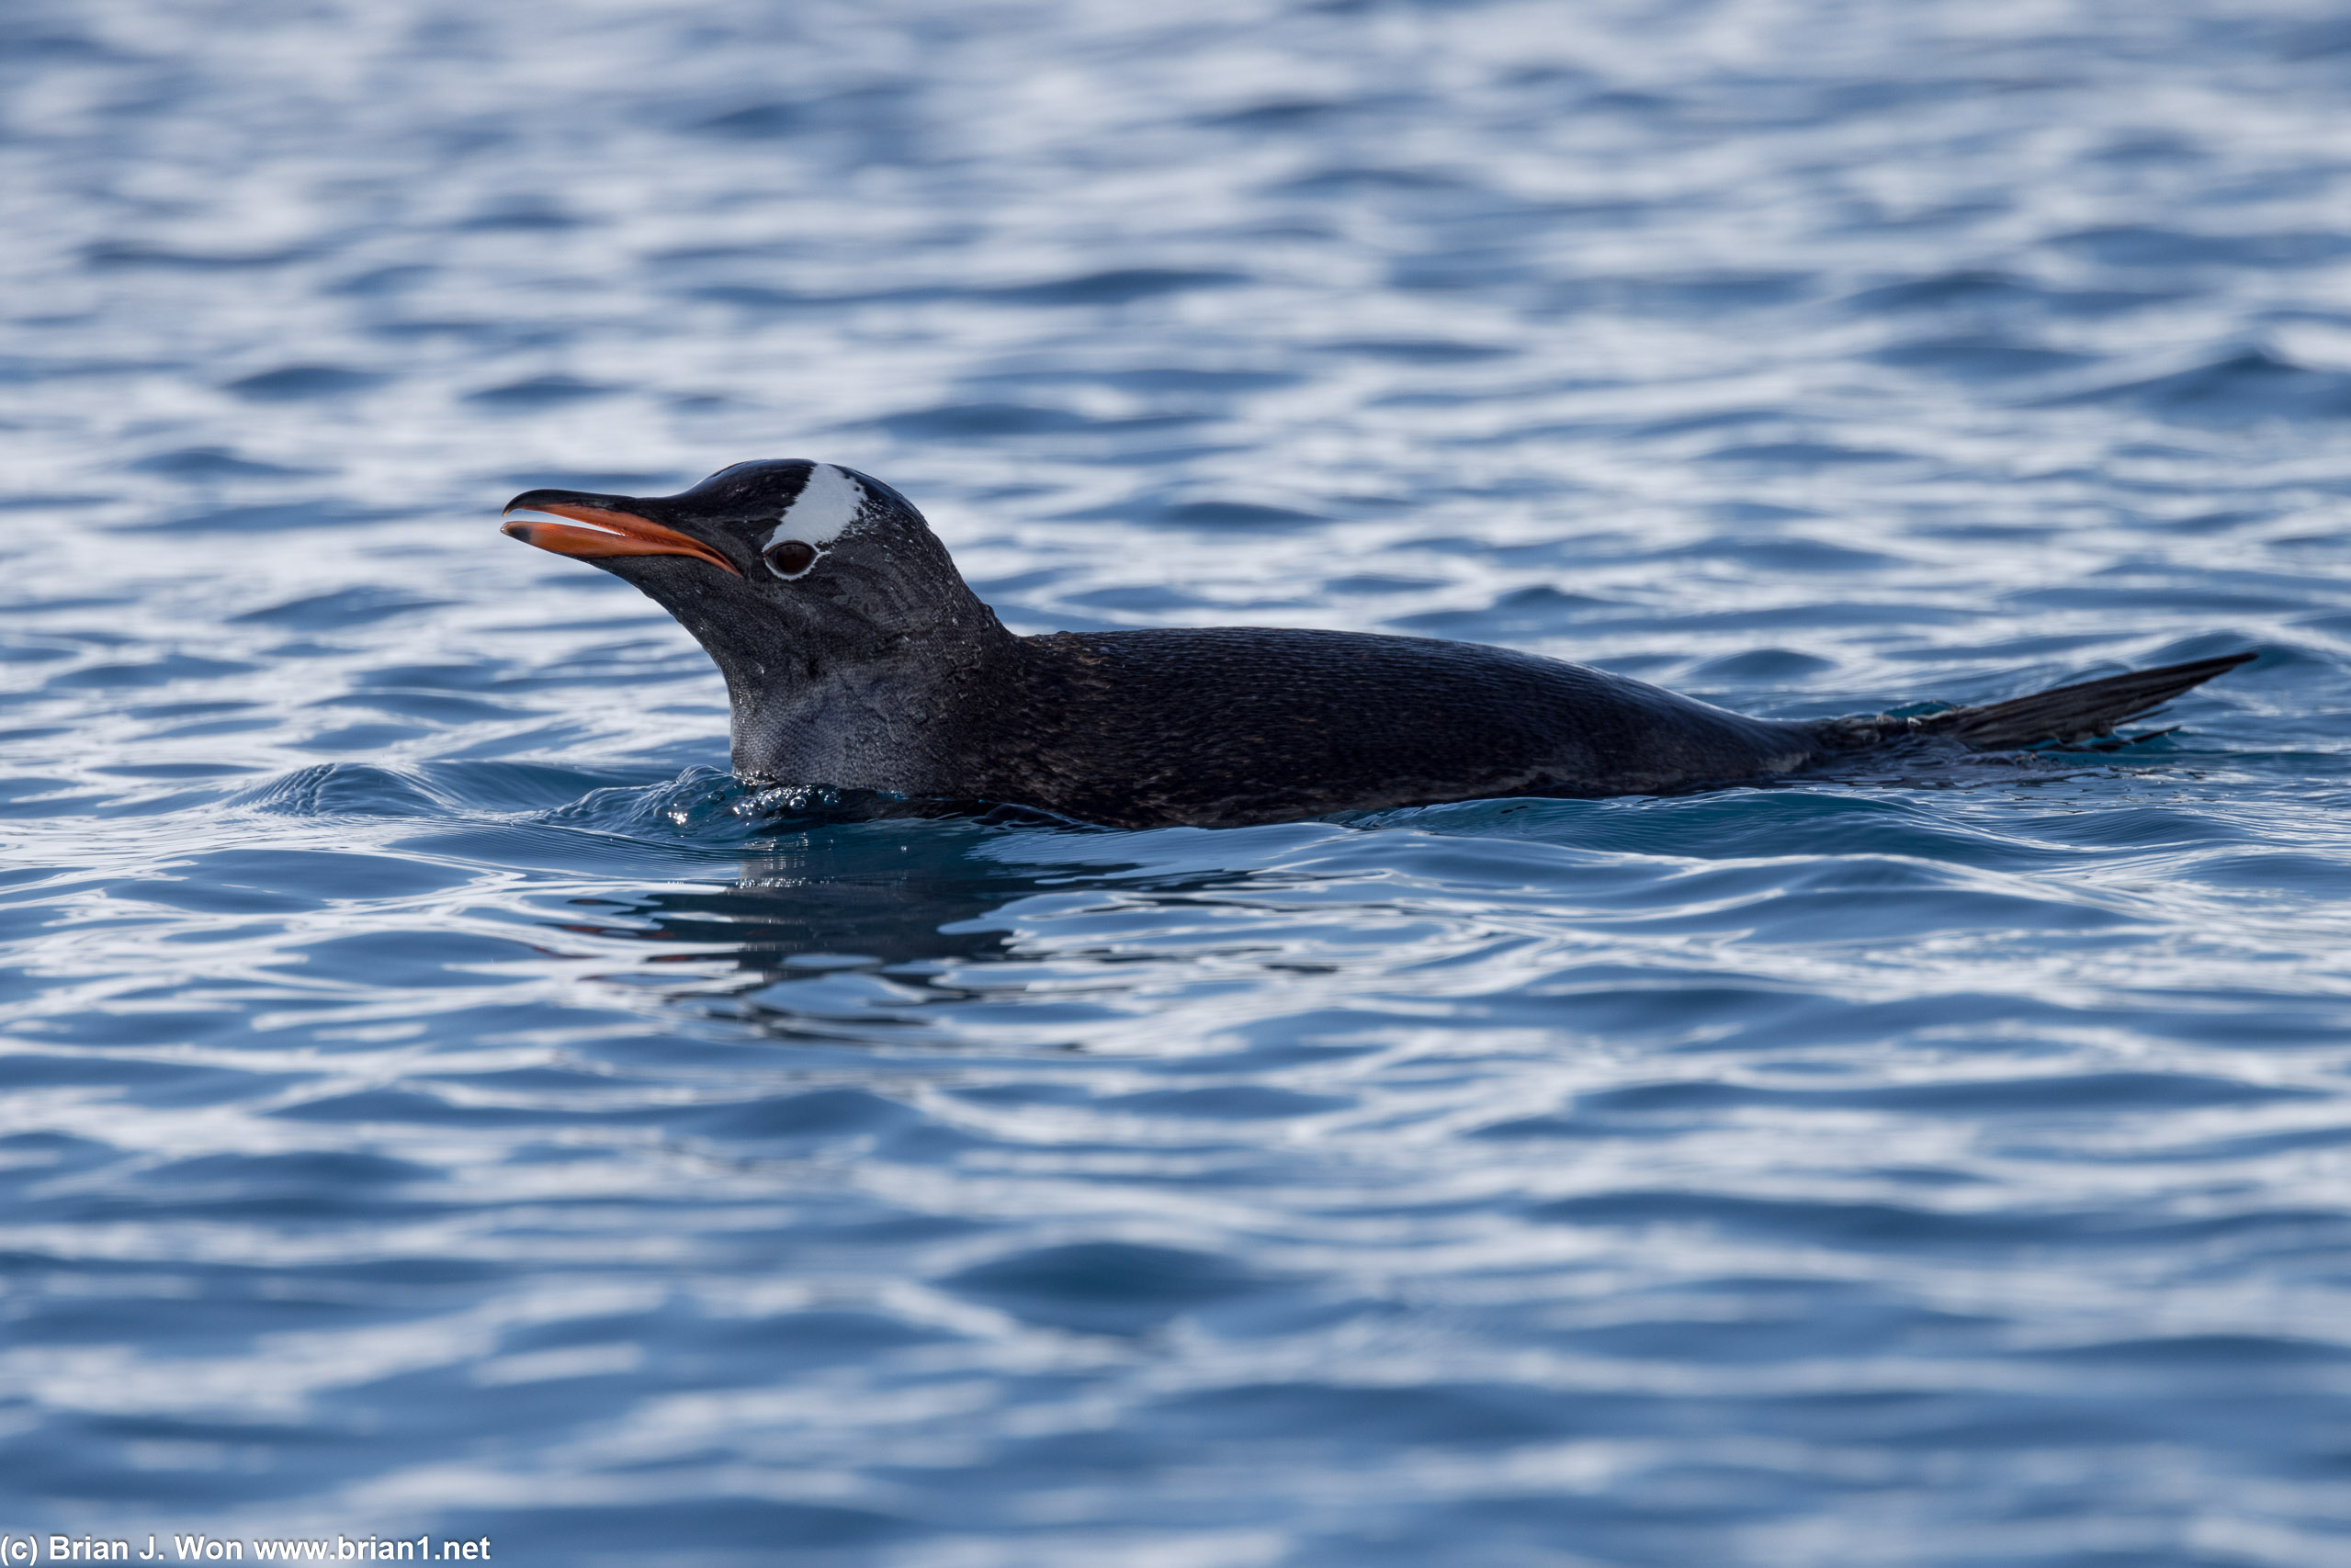 One more gentoo penguin for good measure.